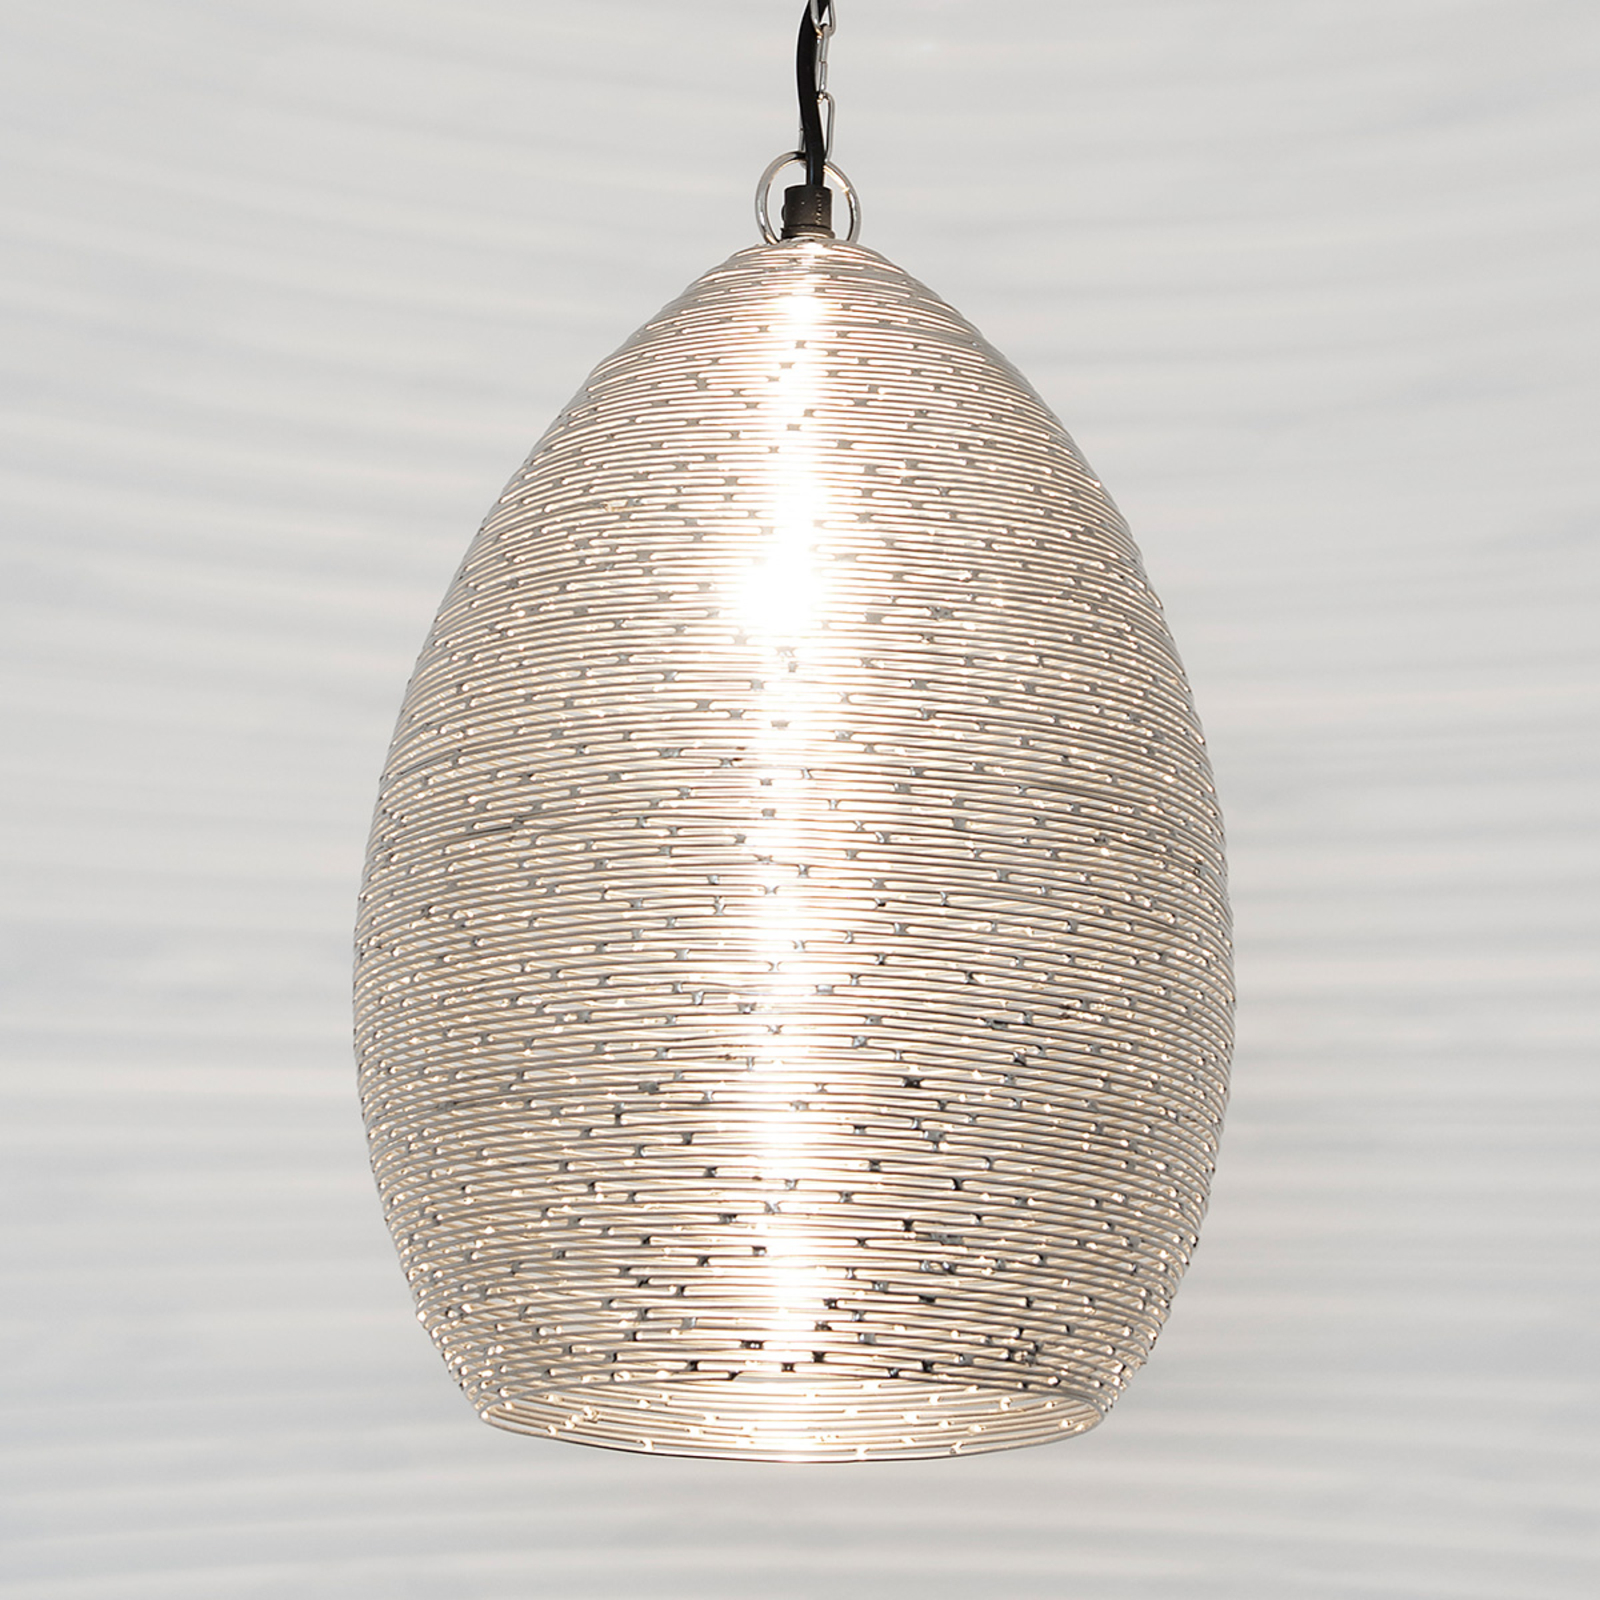 Colibri pendant lamp in nickel-plated steel wire